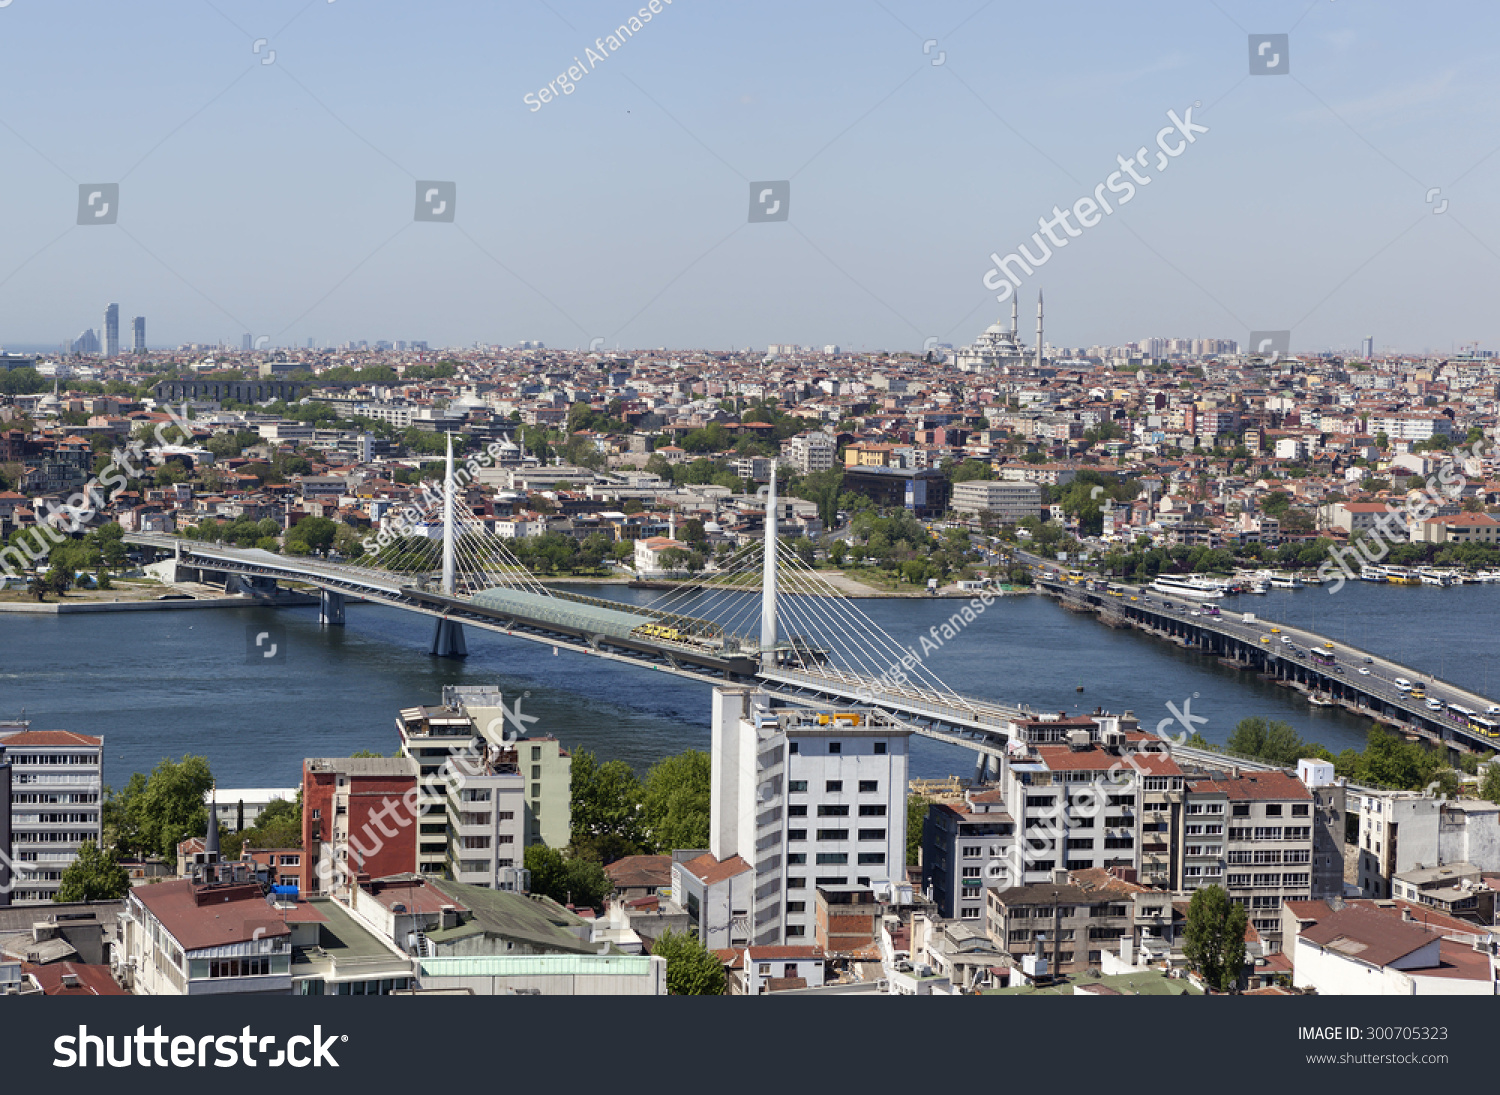 ISTANBUL, TURKEY - MAY 11, 2015: Photo of View of the historic center and the bridge across the Golden Horn. #300705323